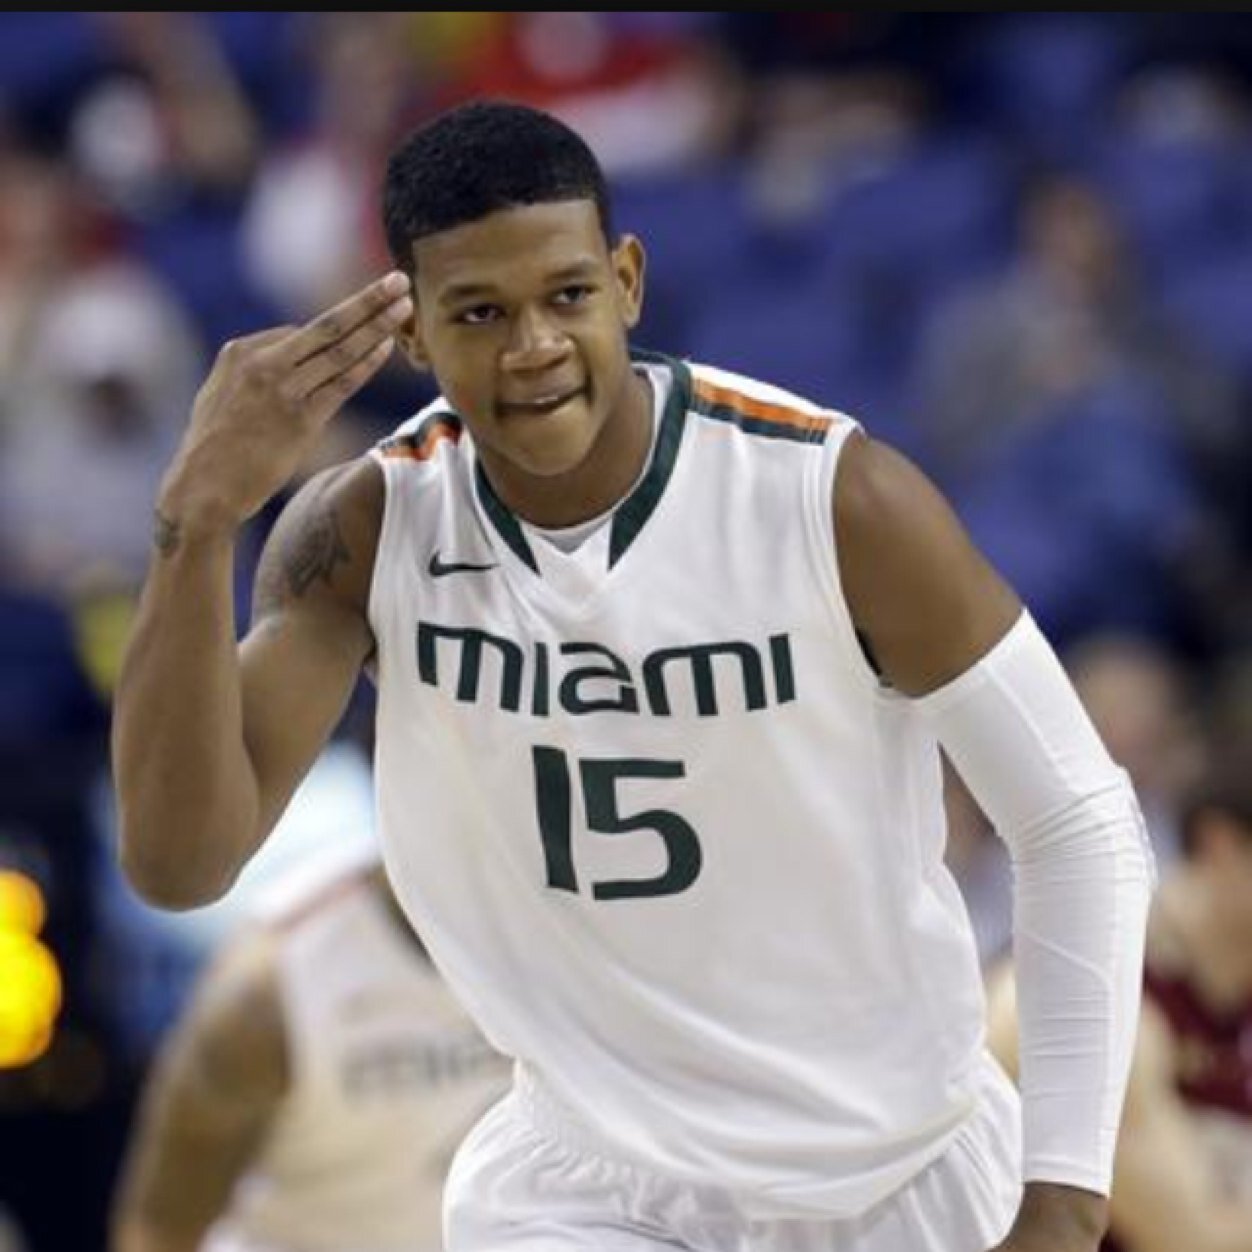 Senior Guard for miami Strive4greatness Work+Dedication=Success #15 is my pride
New to twitter
Official page of Rion Brown